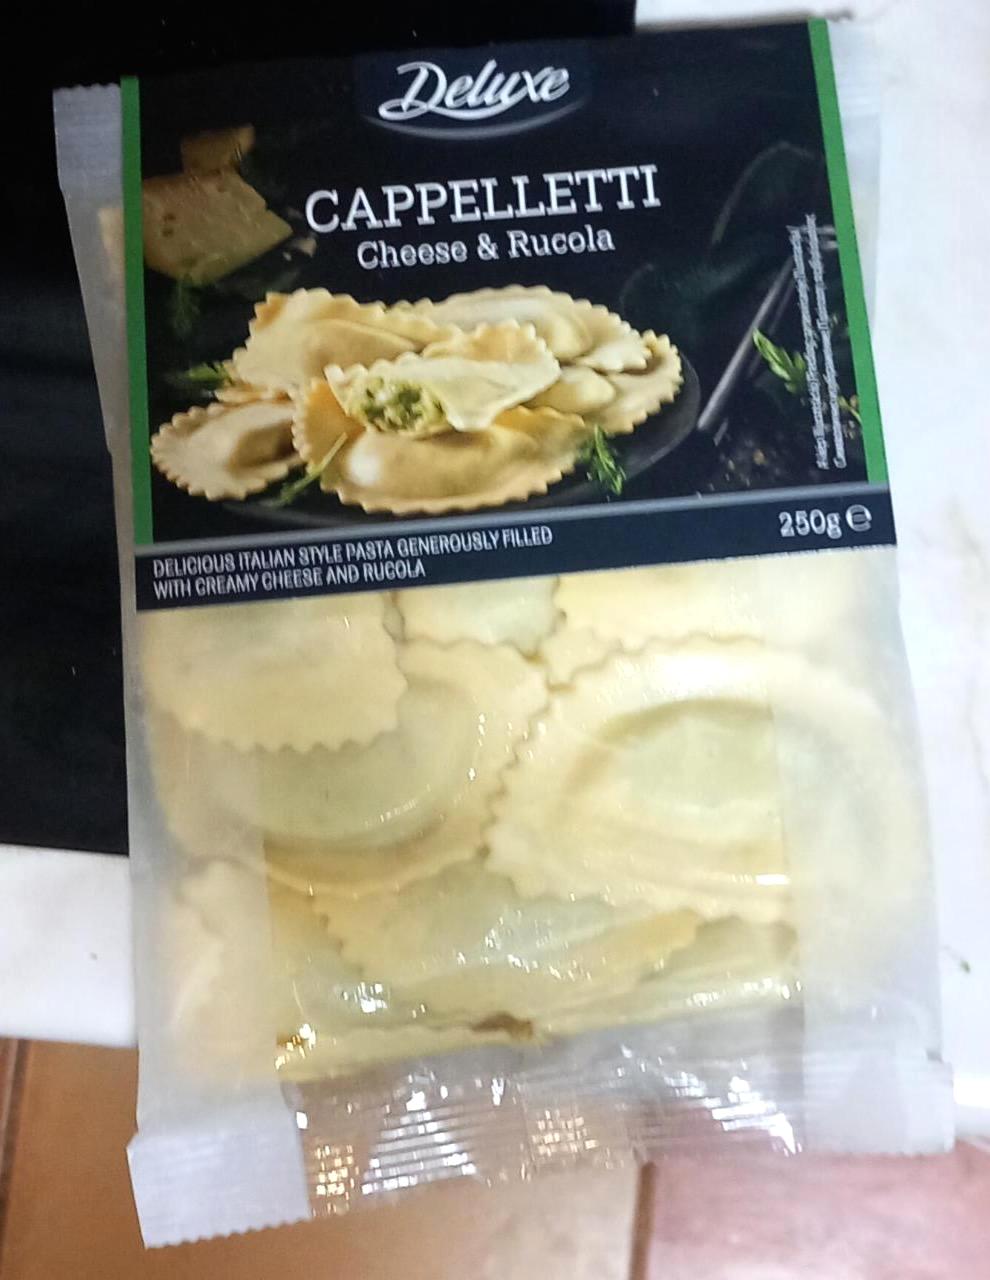 Képek - Cappelletti Cheese & Rucola Deluxe